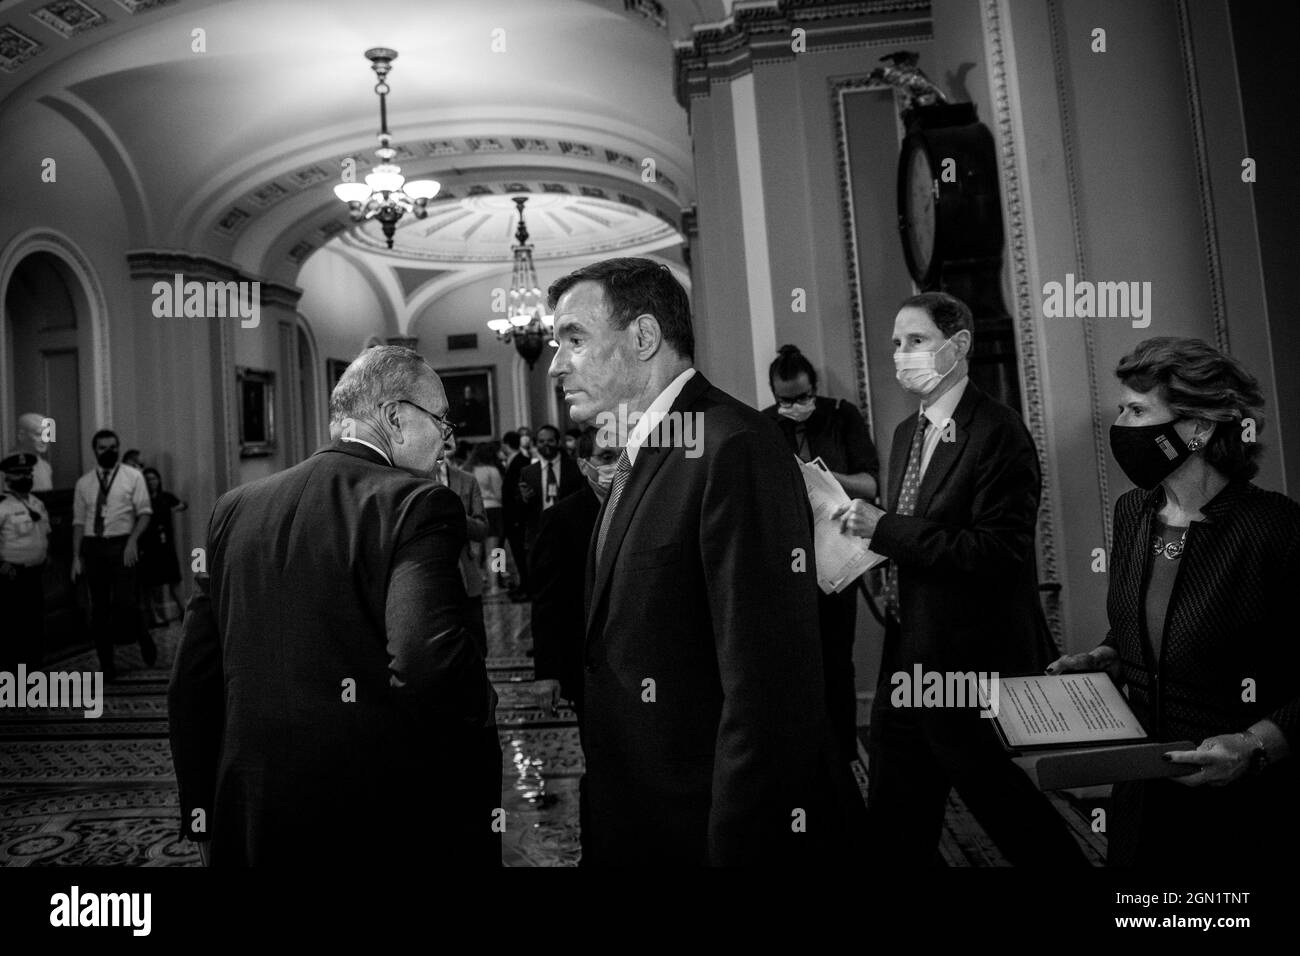 Washington, United States Of America. 21st Sep, 2021. United States Senate Majority Leader Chuck Schumer (Democrat of New York), left, United States Senator Mark Warner (Democrat of Virginia), second from left, United States Senator Ron Wyden (Democrat of Oregon), second from right, and United States Senator Debbie Stabenow (Democrat of Michigan), right, arrive for the Senate Democrat's policy luncheon press conference at the US Capitol in Washington, DC, Tuesday, September 21, 2021. Credit: Rod Lamkey/CNP/Sipa USA Credit: Sipa USA/Alamy Live News Stock Photo